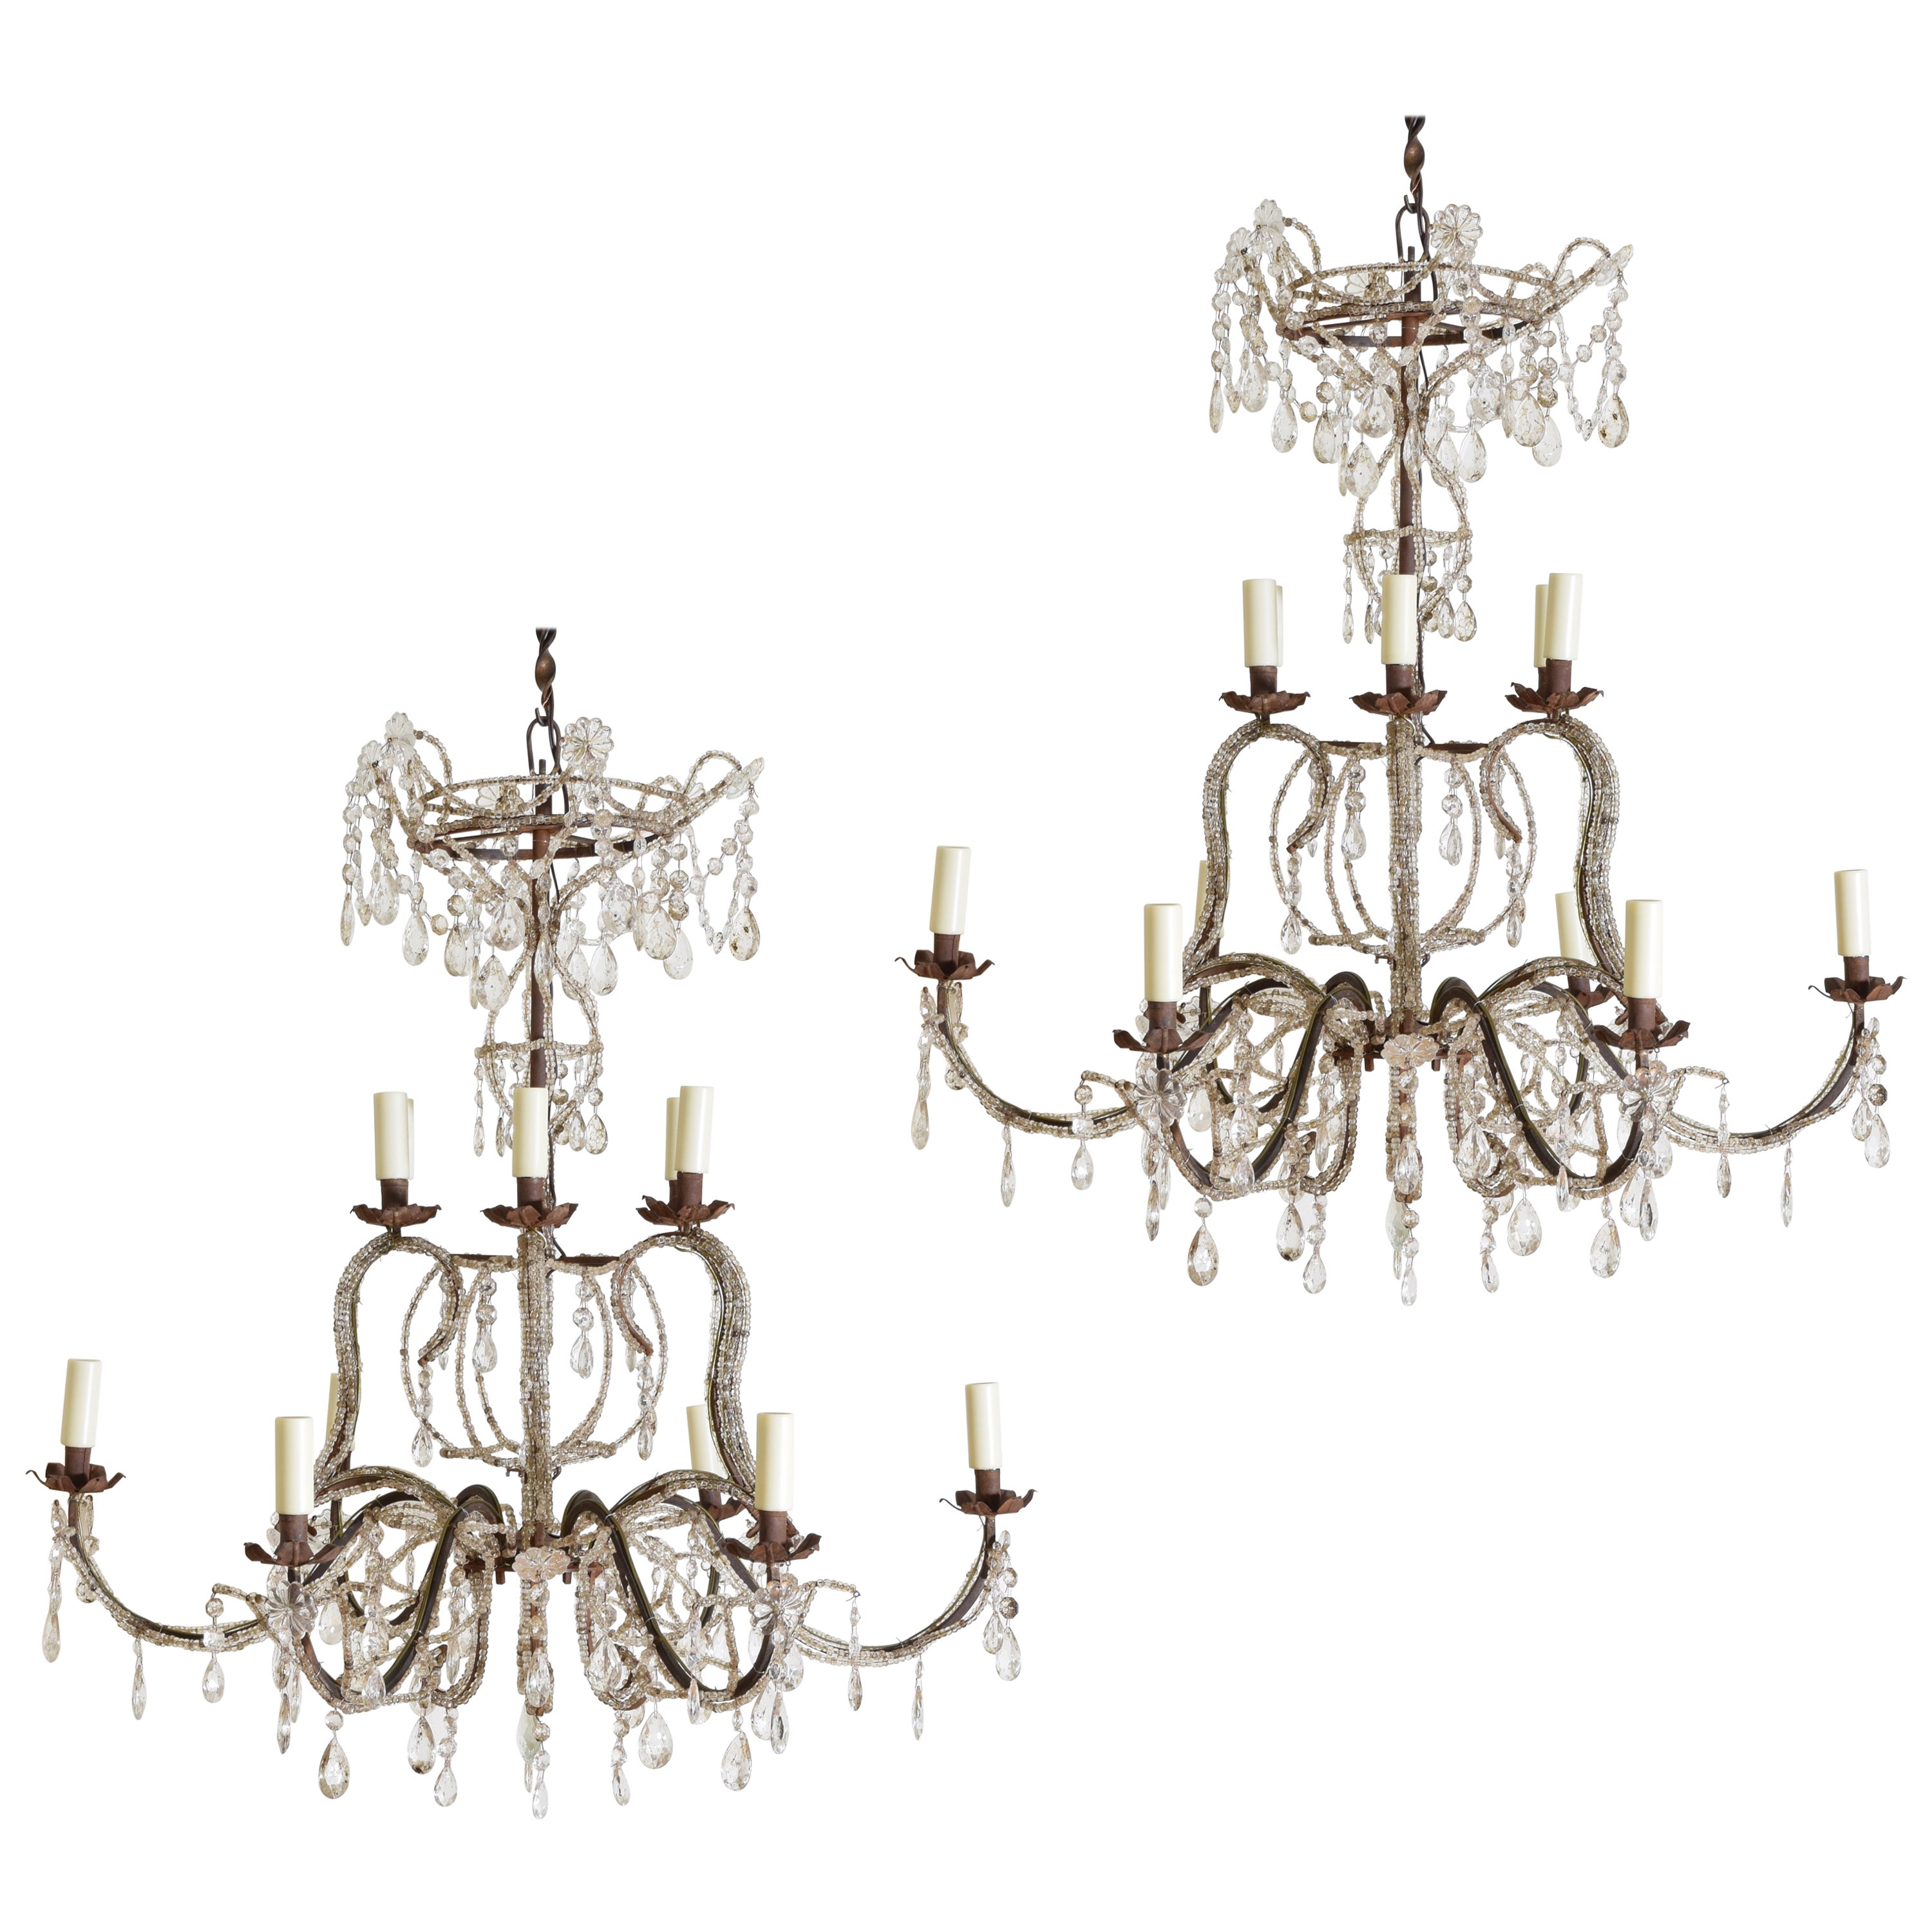 Pair of Italian, Genovese, 2-Tier, 12-Light Glass and Iron Chandeliers For Sale